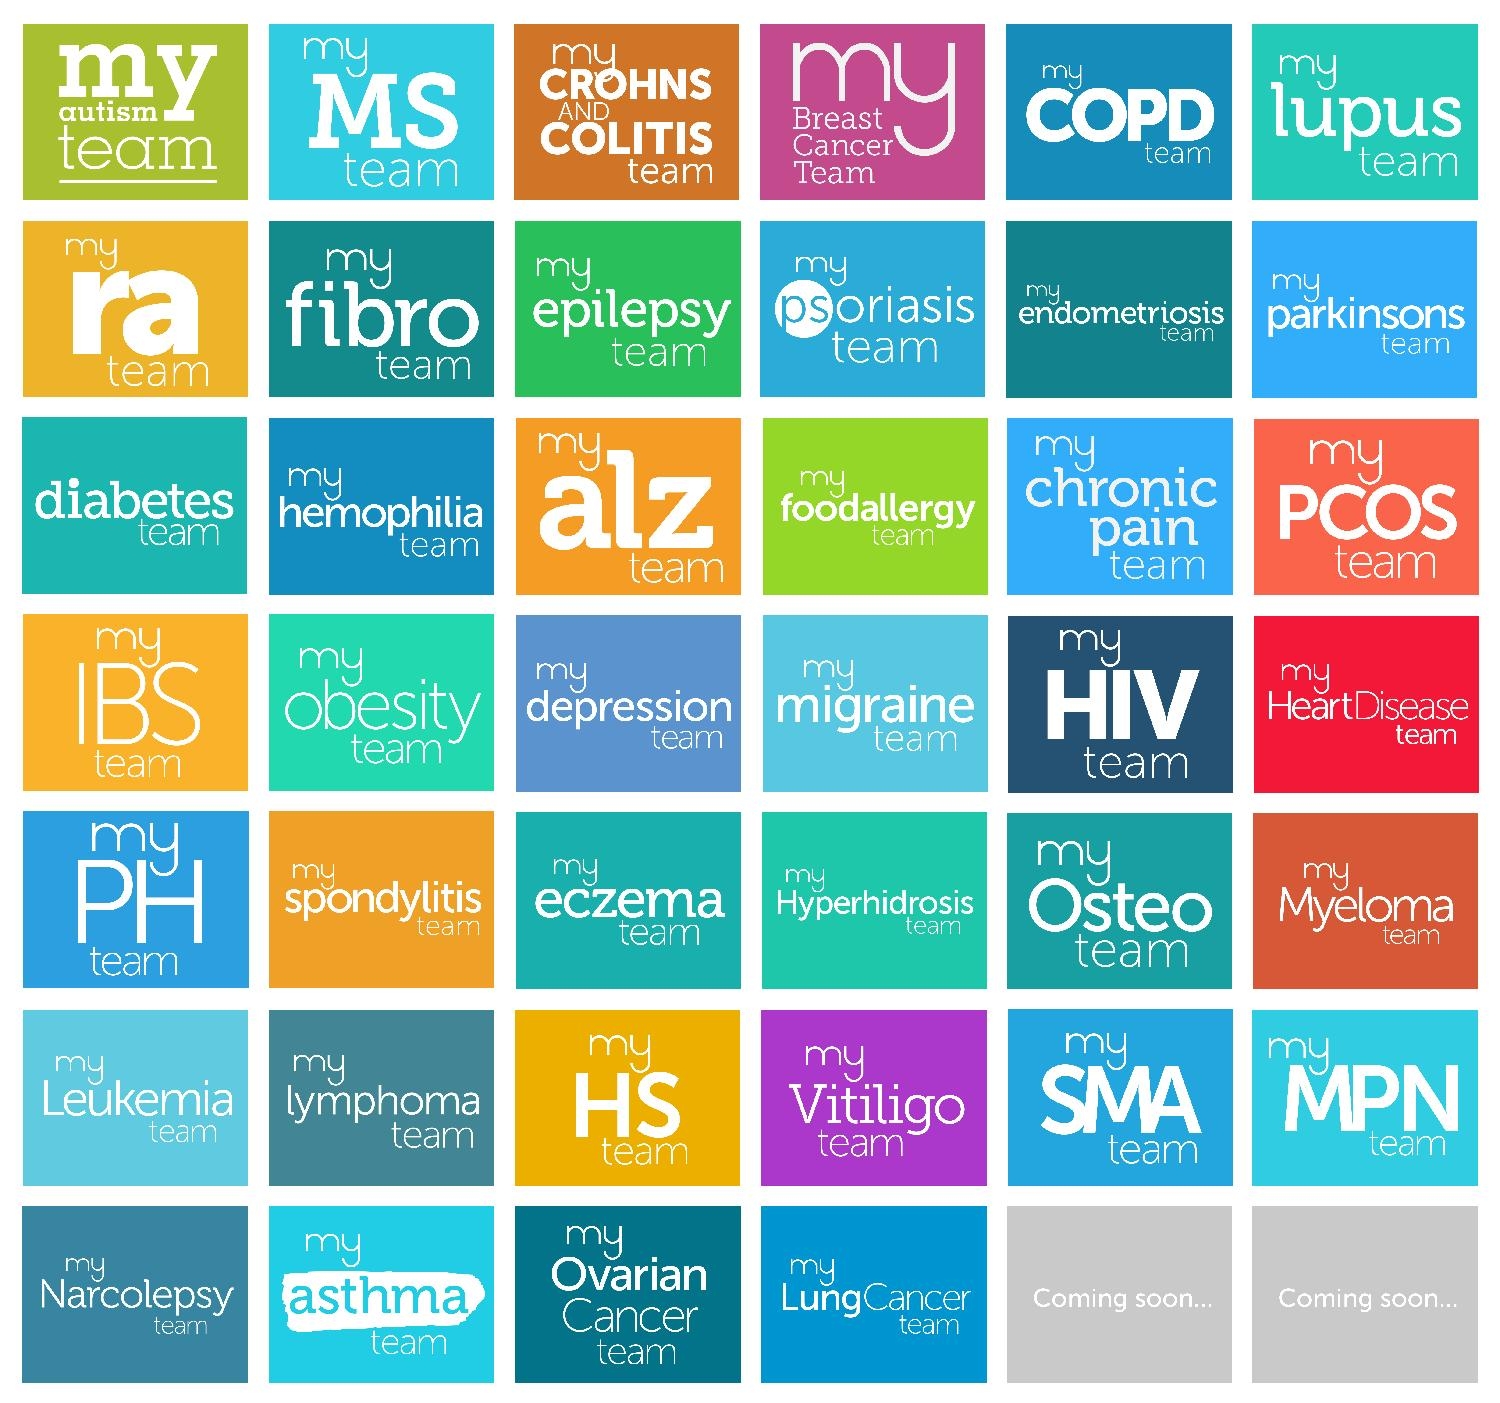 MyHealthTeams creates condition-specific social networks for people living with chronic disease.